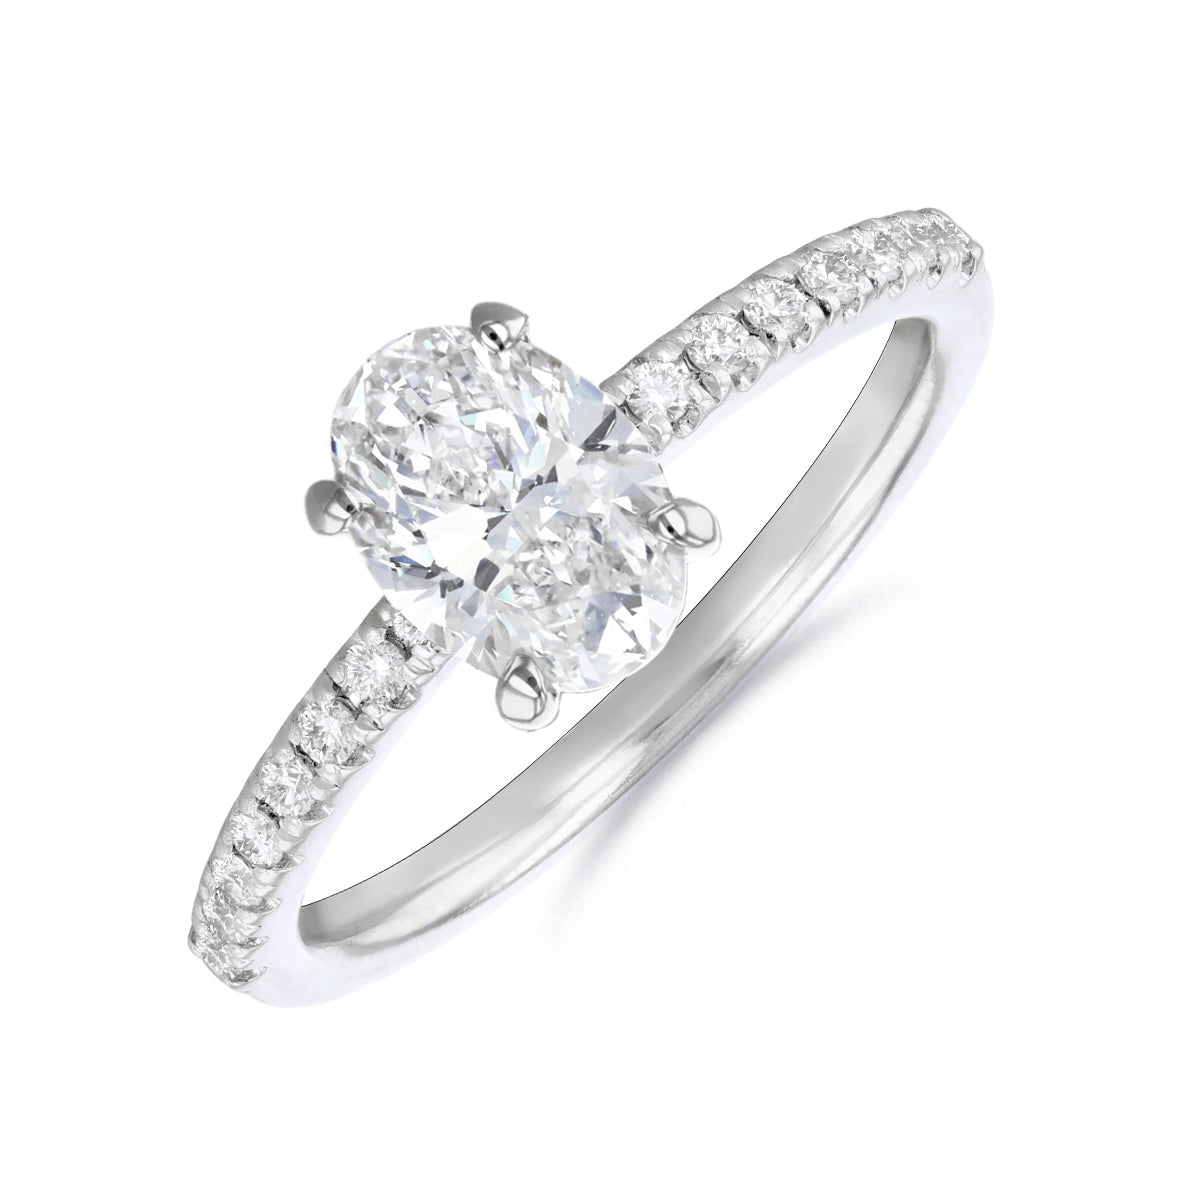 0.50ct Poppy Shoulder Set Oval Cut Diamond Solitaire Engagement Ring | 18ct Yellow Gold